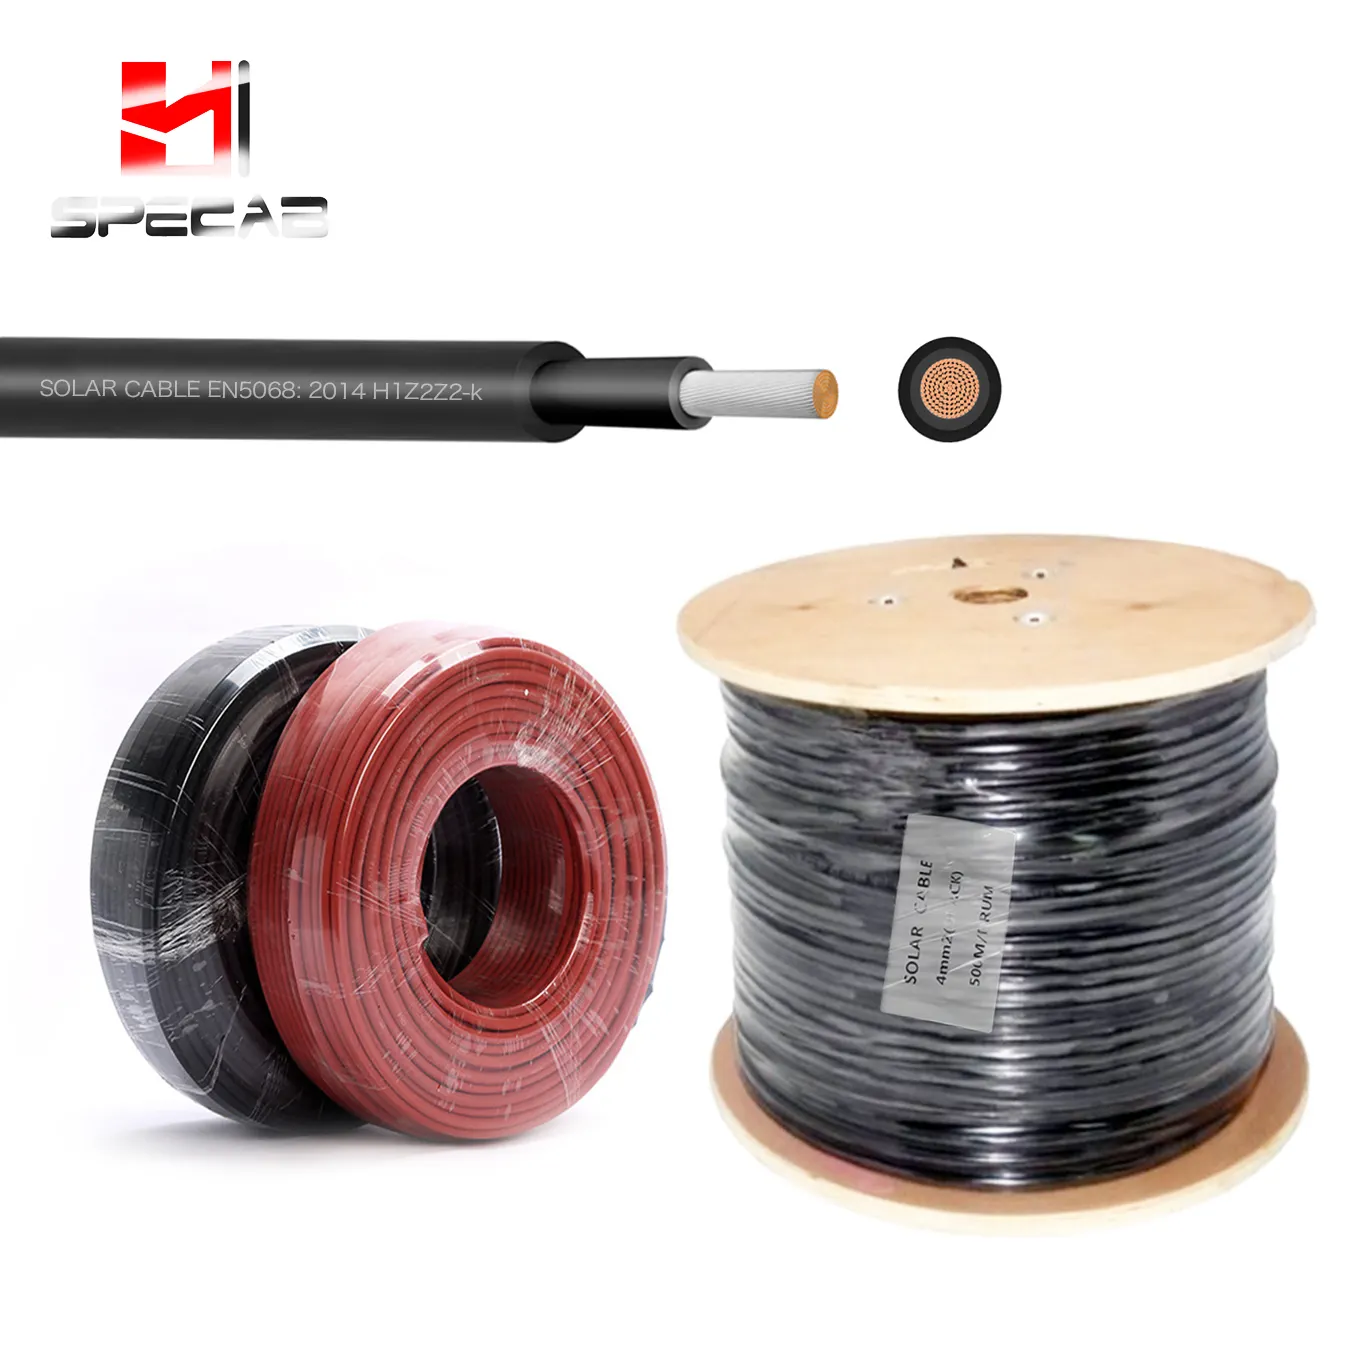 single core 6mm2 H1Z2Z2-k DC solar cable flexible UV resistant e-beam curing XLPE double insulated TUV certificated